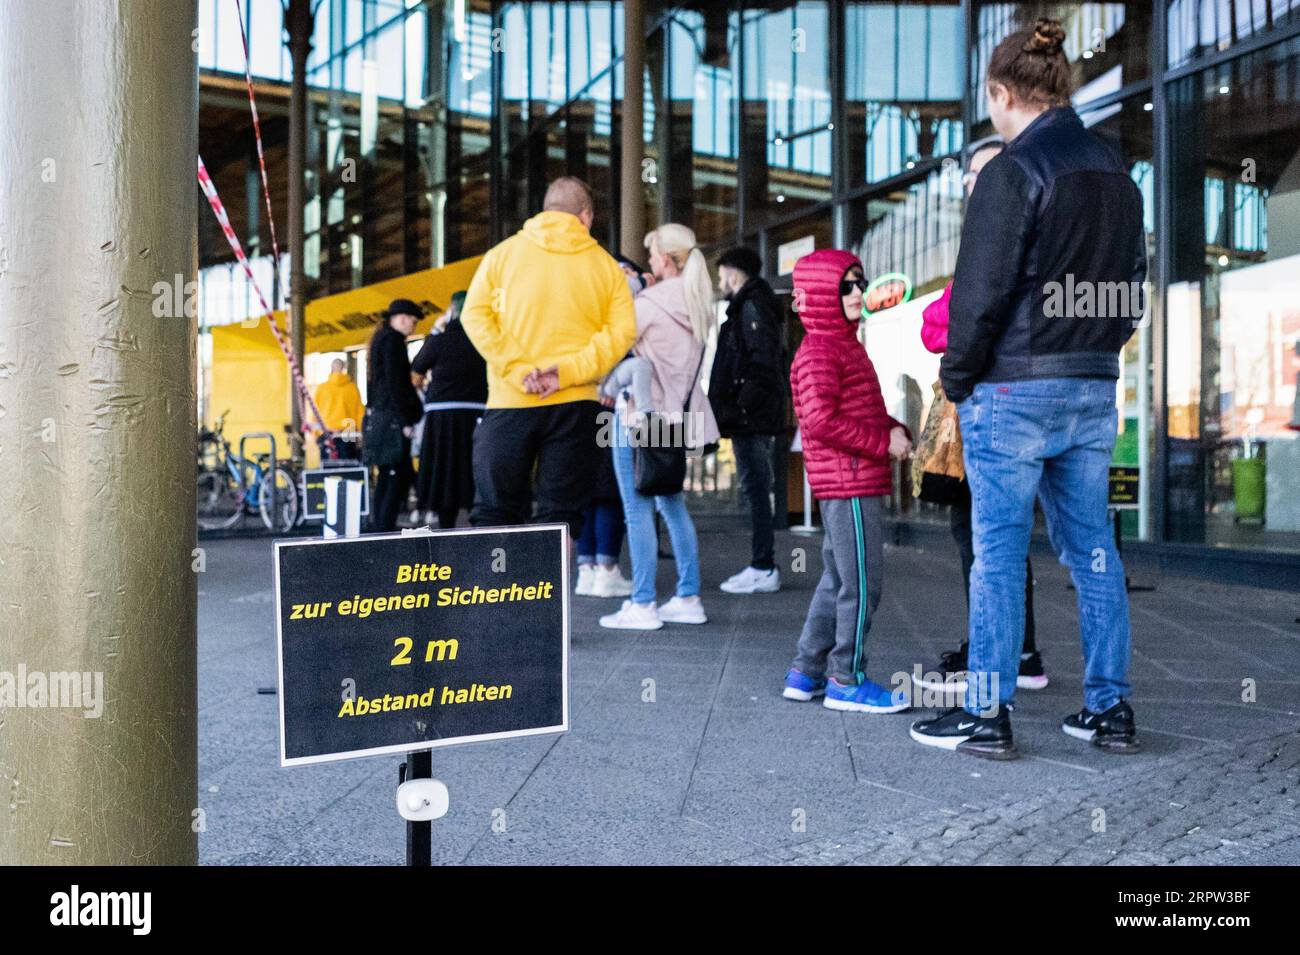 People queue to enter a bicycle shop in Berlin, capital of Germany, April 20, 2020. Starting from Monday, shops in Germany with a maximum sales area of up to 800 square meters are allowed to open under new regulations for hygiene as well as access and queue control. Photo by Binh Truong/Xinhua GERMANY-BERLIN-COVID-19-SHOPS-REOPENING PUBLICATIONxNOTxINxCHN Stock Photo